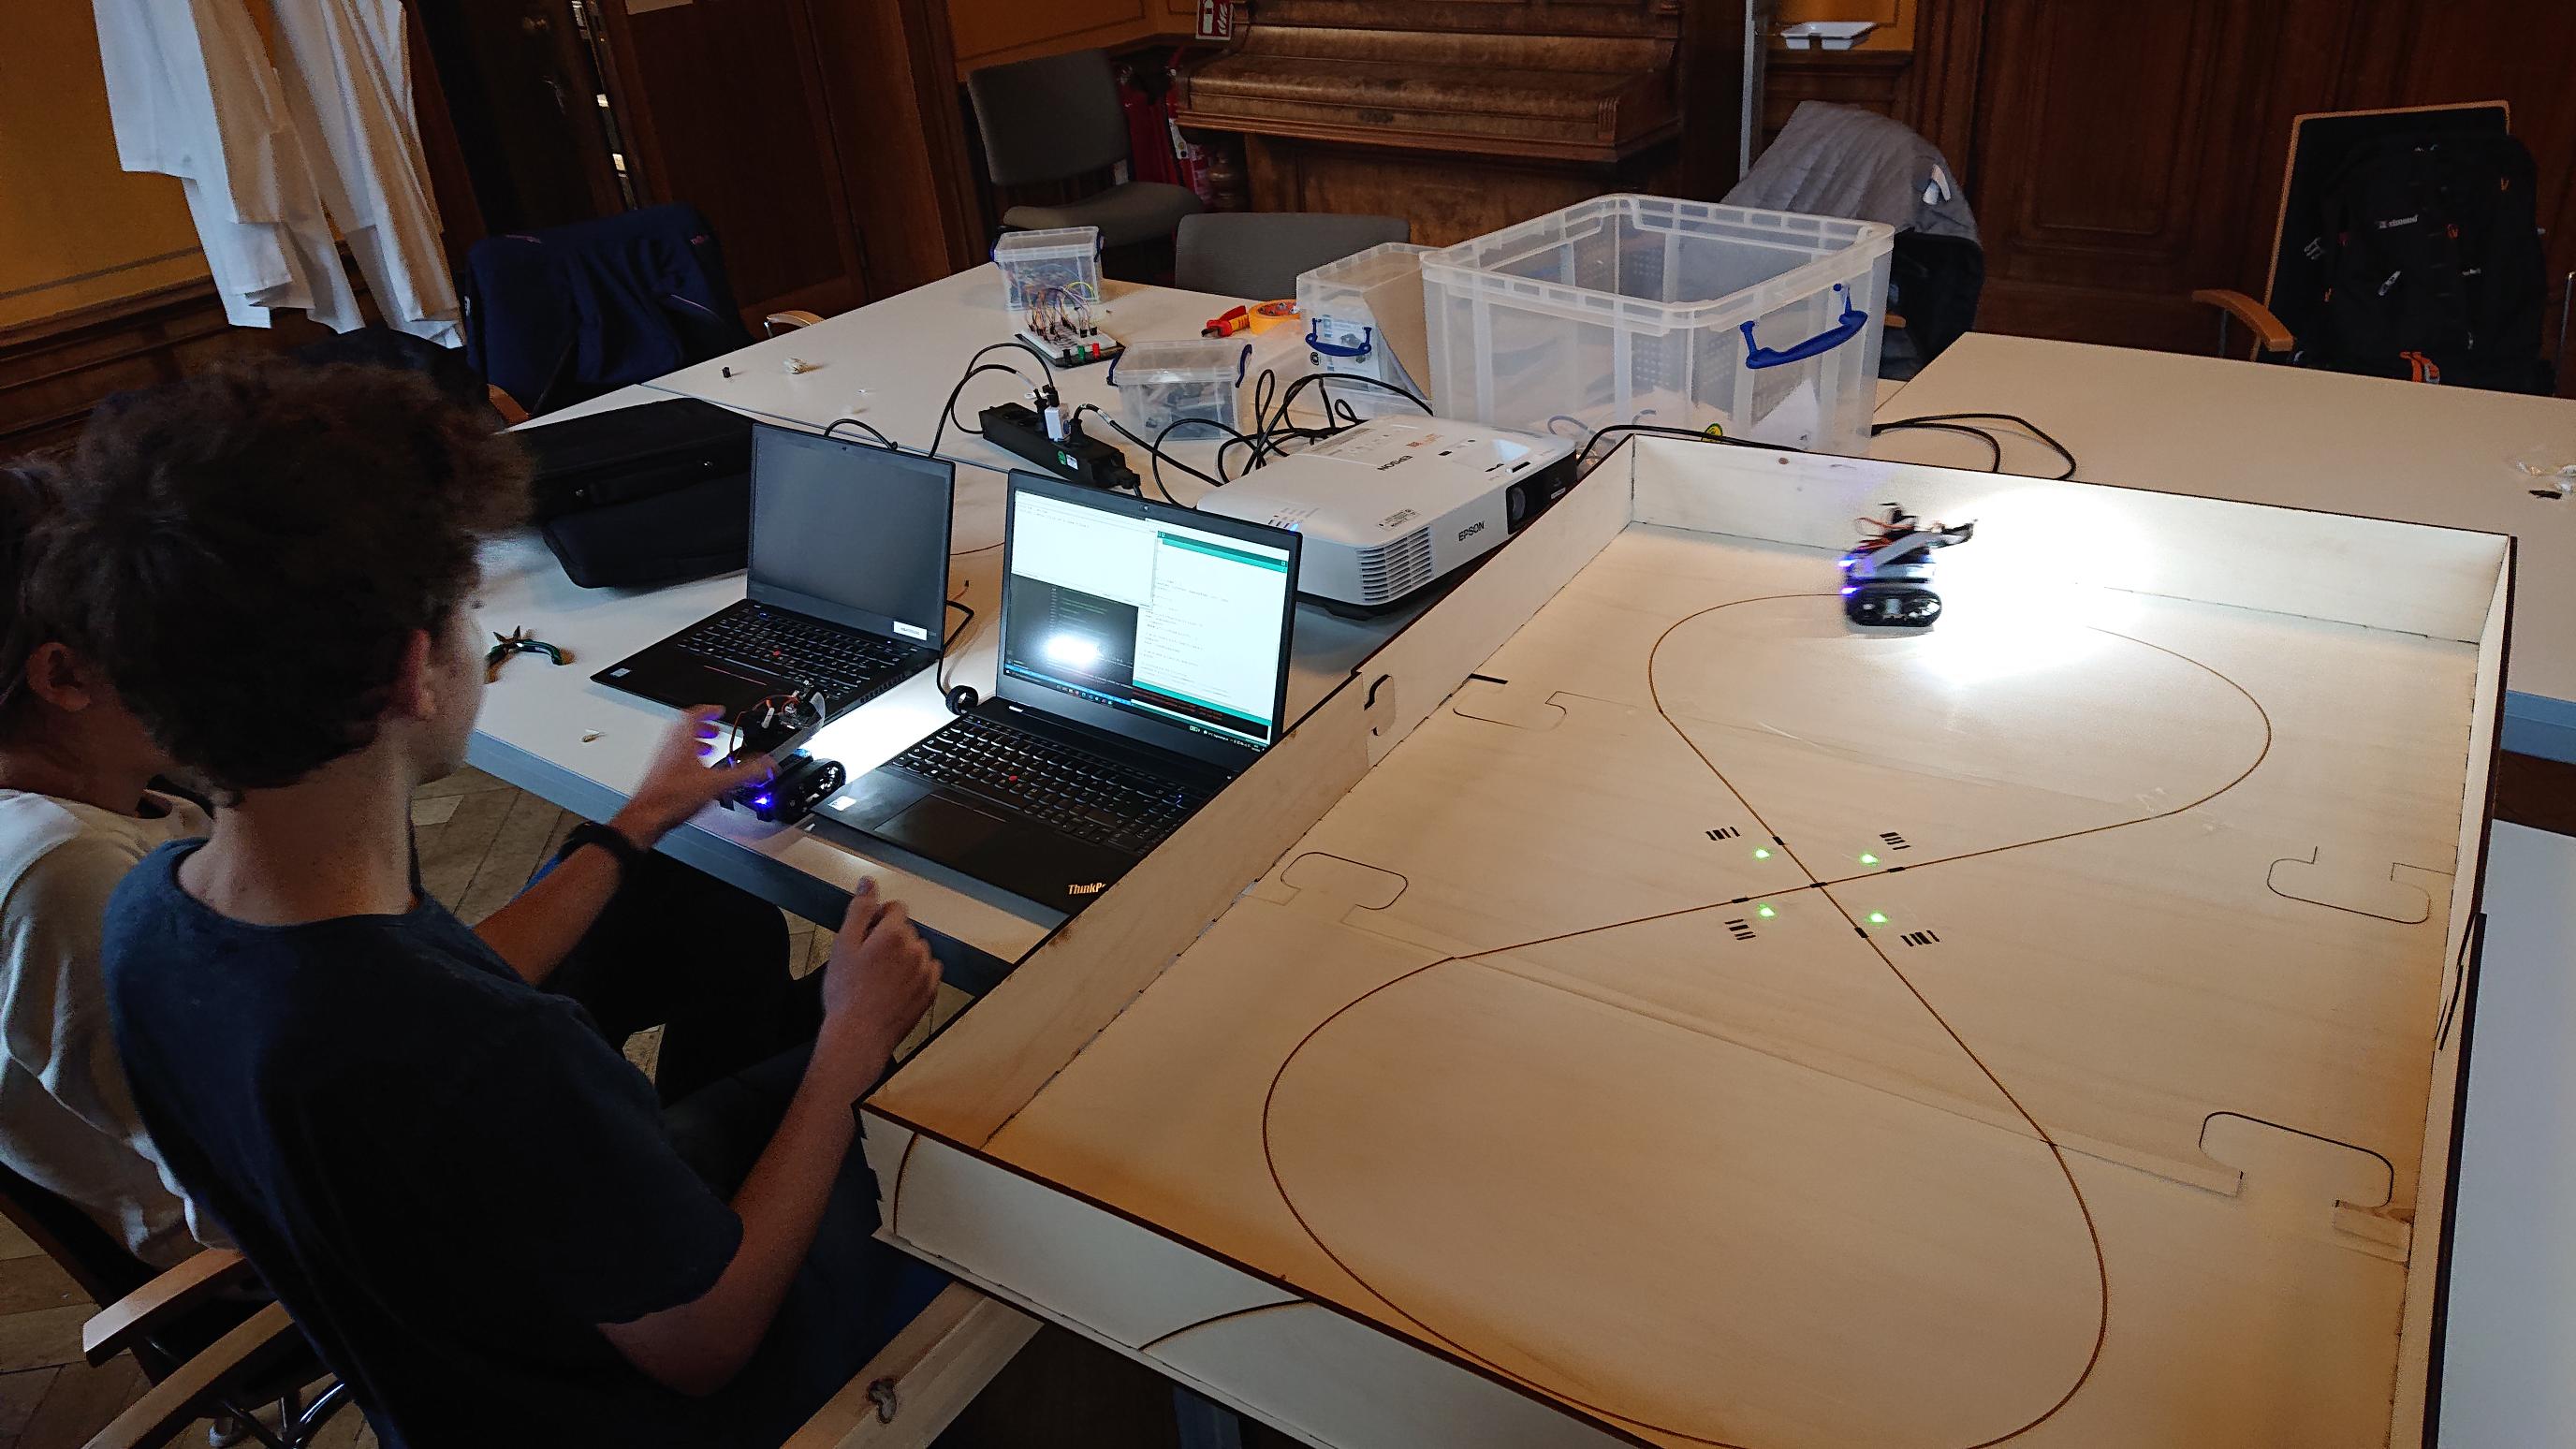 2 children sit at a table at a laptop. on the laptop screen one can see code. one kid is holding a pixybot, he just programmed. Another pixibot is on a cardboard racetrack right beside them.